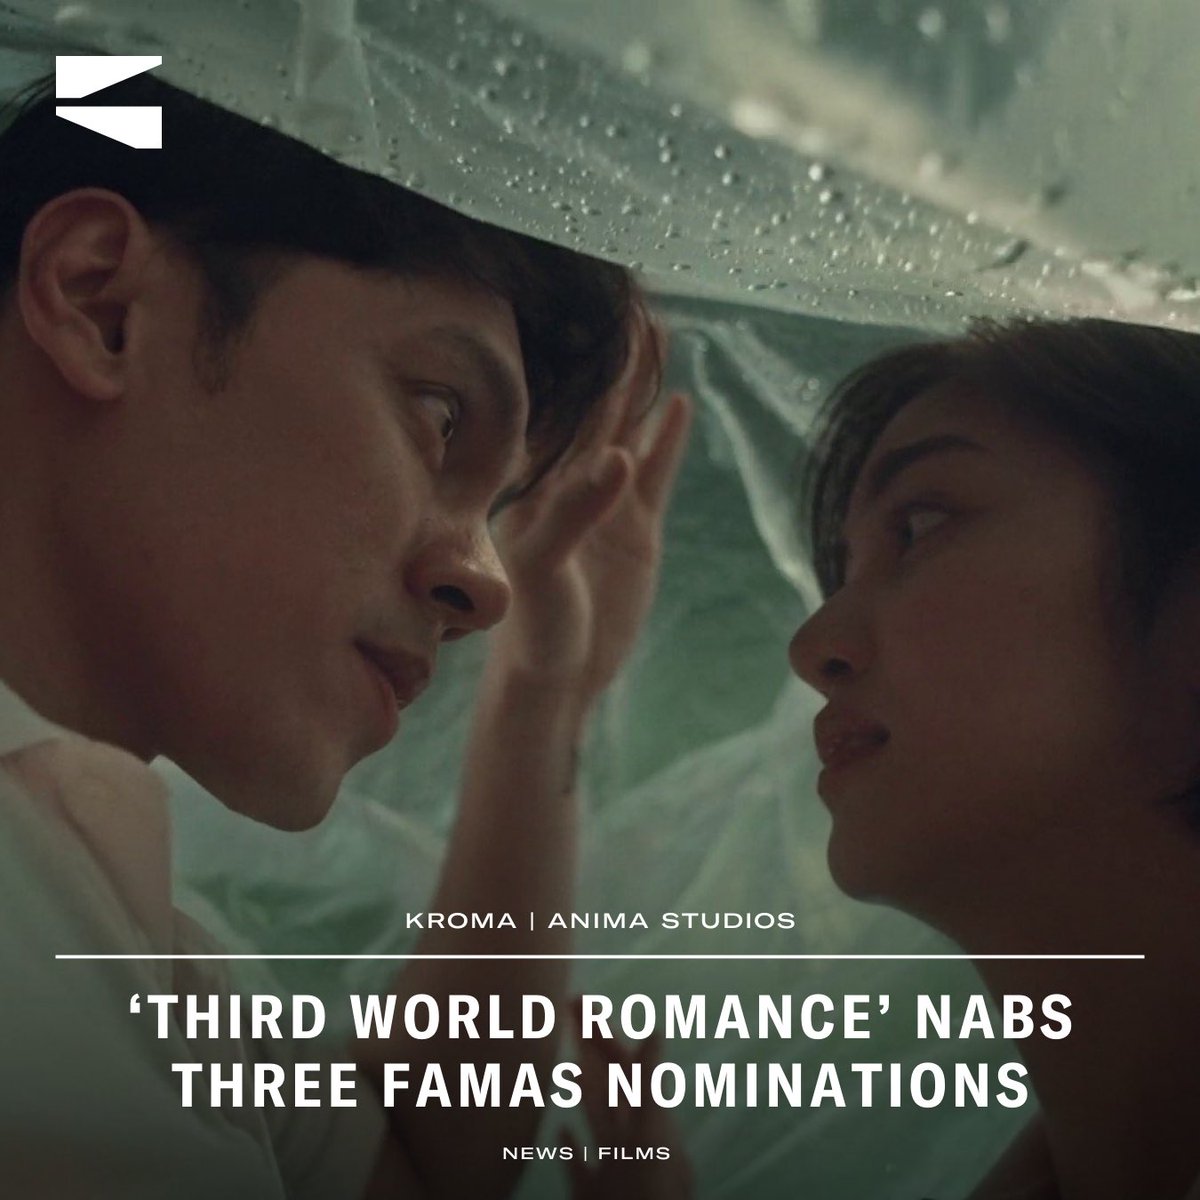 “Third World Romance” strikes three nominations at the 72nd FAMAS Awards! 🤩 Charlie Dizon’s standout performance in the @animastudiosph and @Black_SheepPH sheep film lands her a Best Actress nod, while Kara Moreno and Eero Yves Francisco rake in nominations for Best